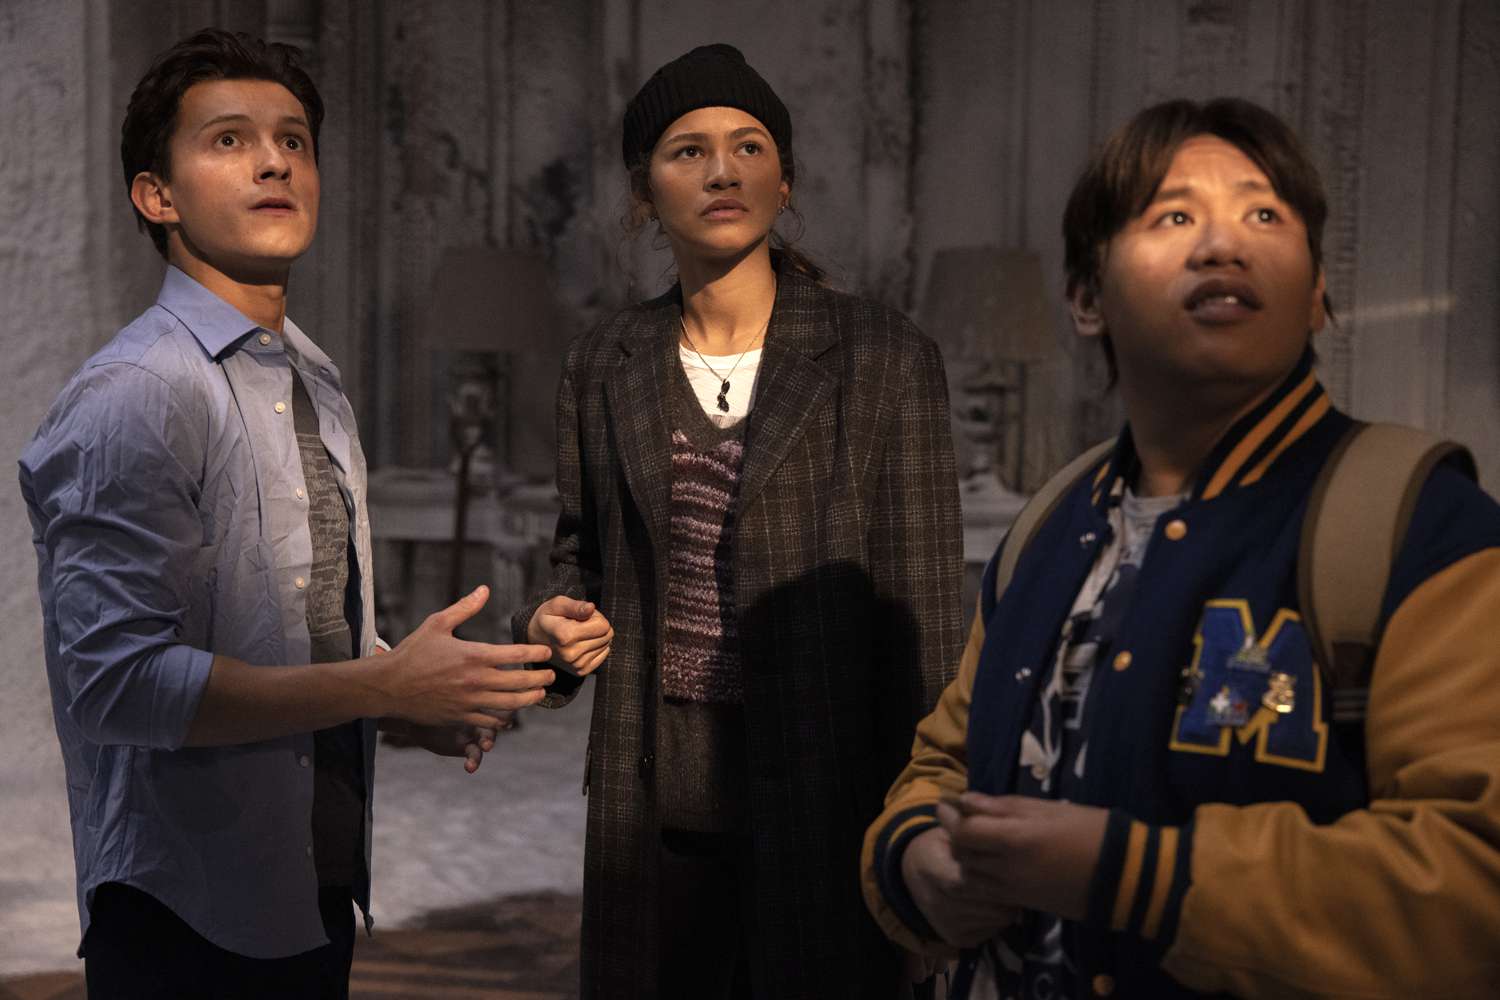 Tom Holland as spider-man (left), zendaya as mj (middle), and jacob batalon as ned leeds (right)